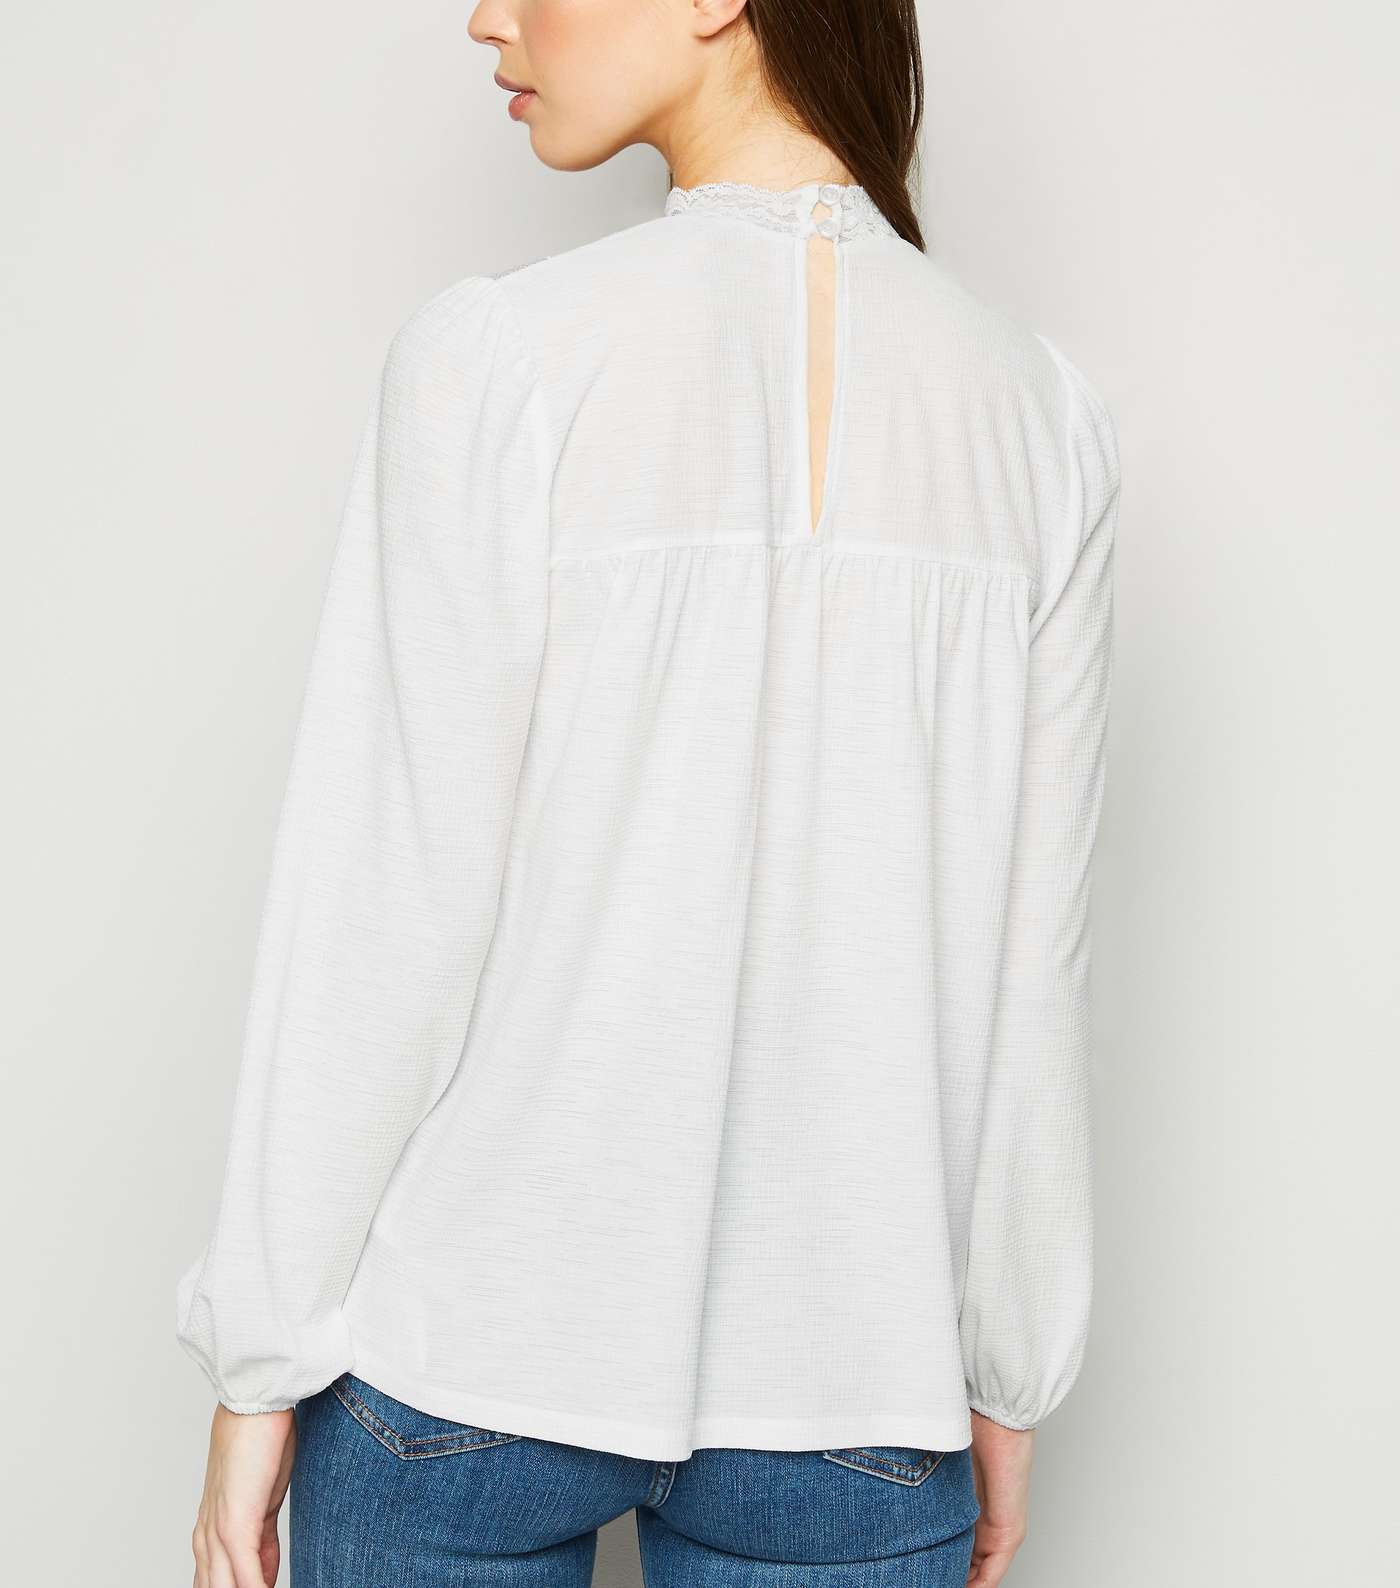 Off White Textured Embroidered Yoke Top Image 3